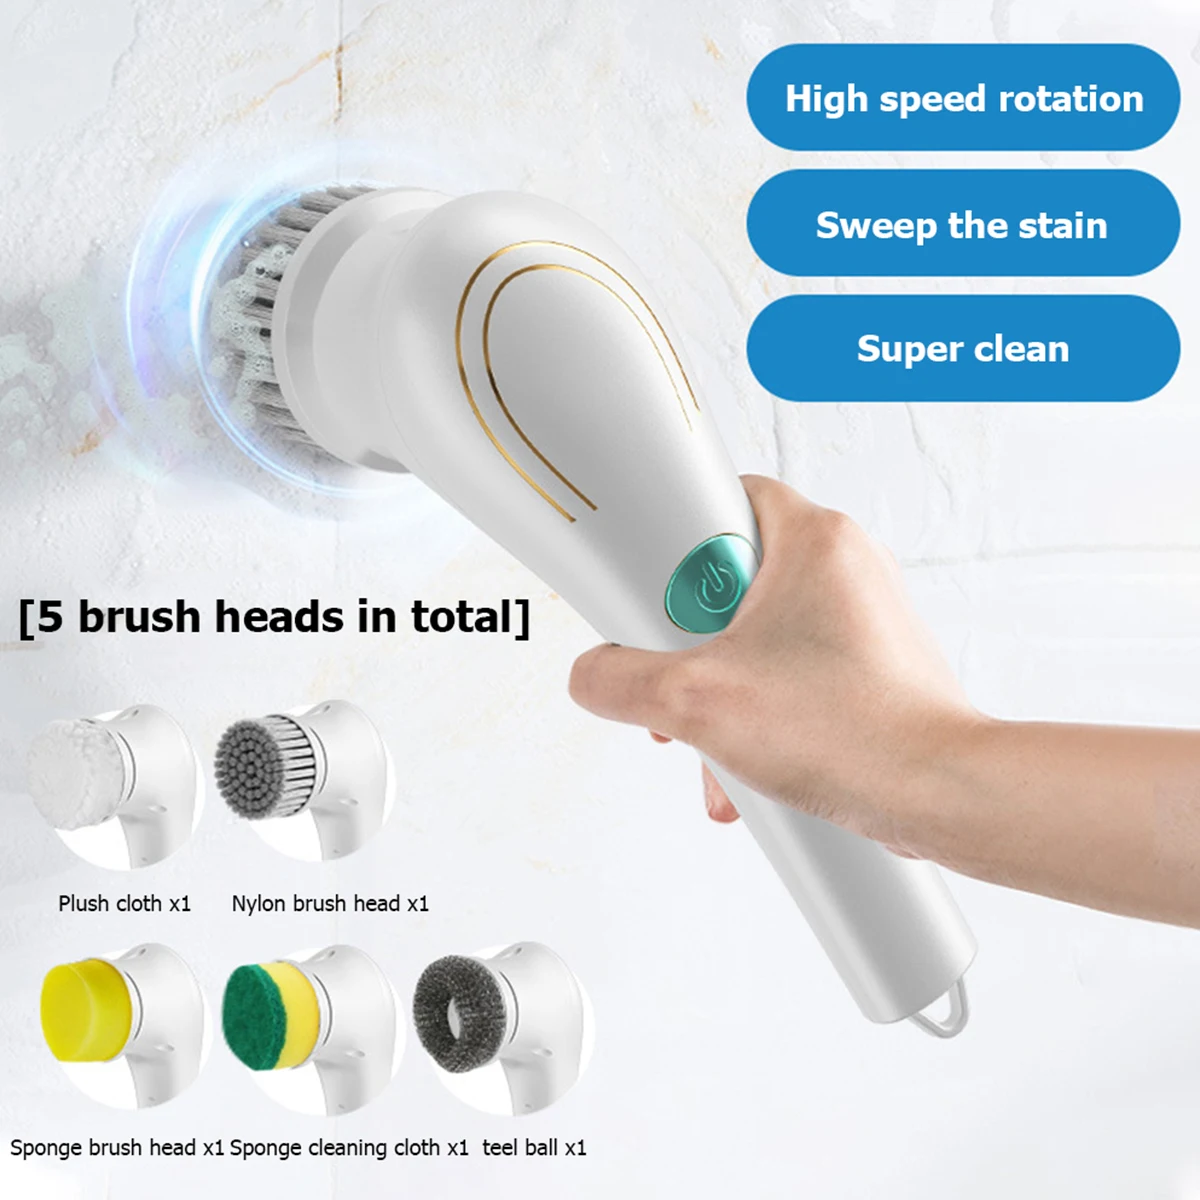 https://ae01.alicdn.com/kf/S89ce58d94d8744e9aeb7a700b1008135R/Electric-Cleaning-Brush-Electric-Spin-Scrubber-with-5-Brush-Heads-Reusable-IPX7-Waterproof-360-Rotating-Shower.jpg